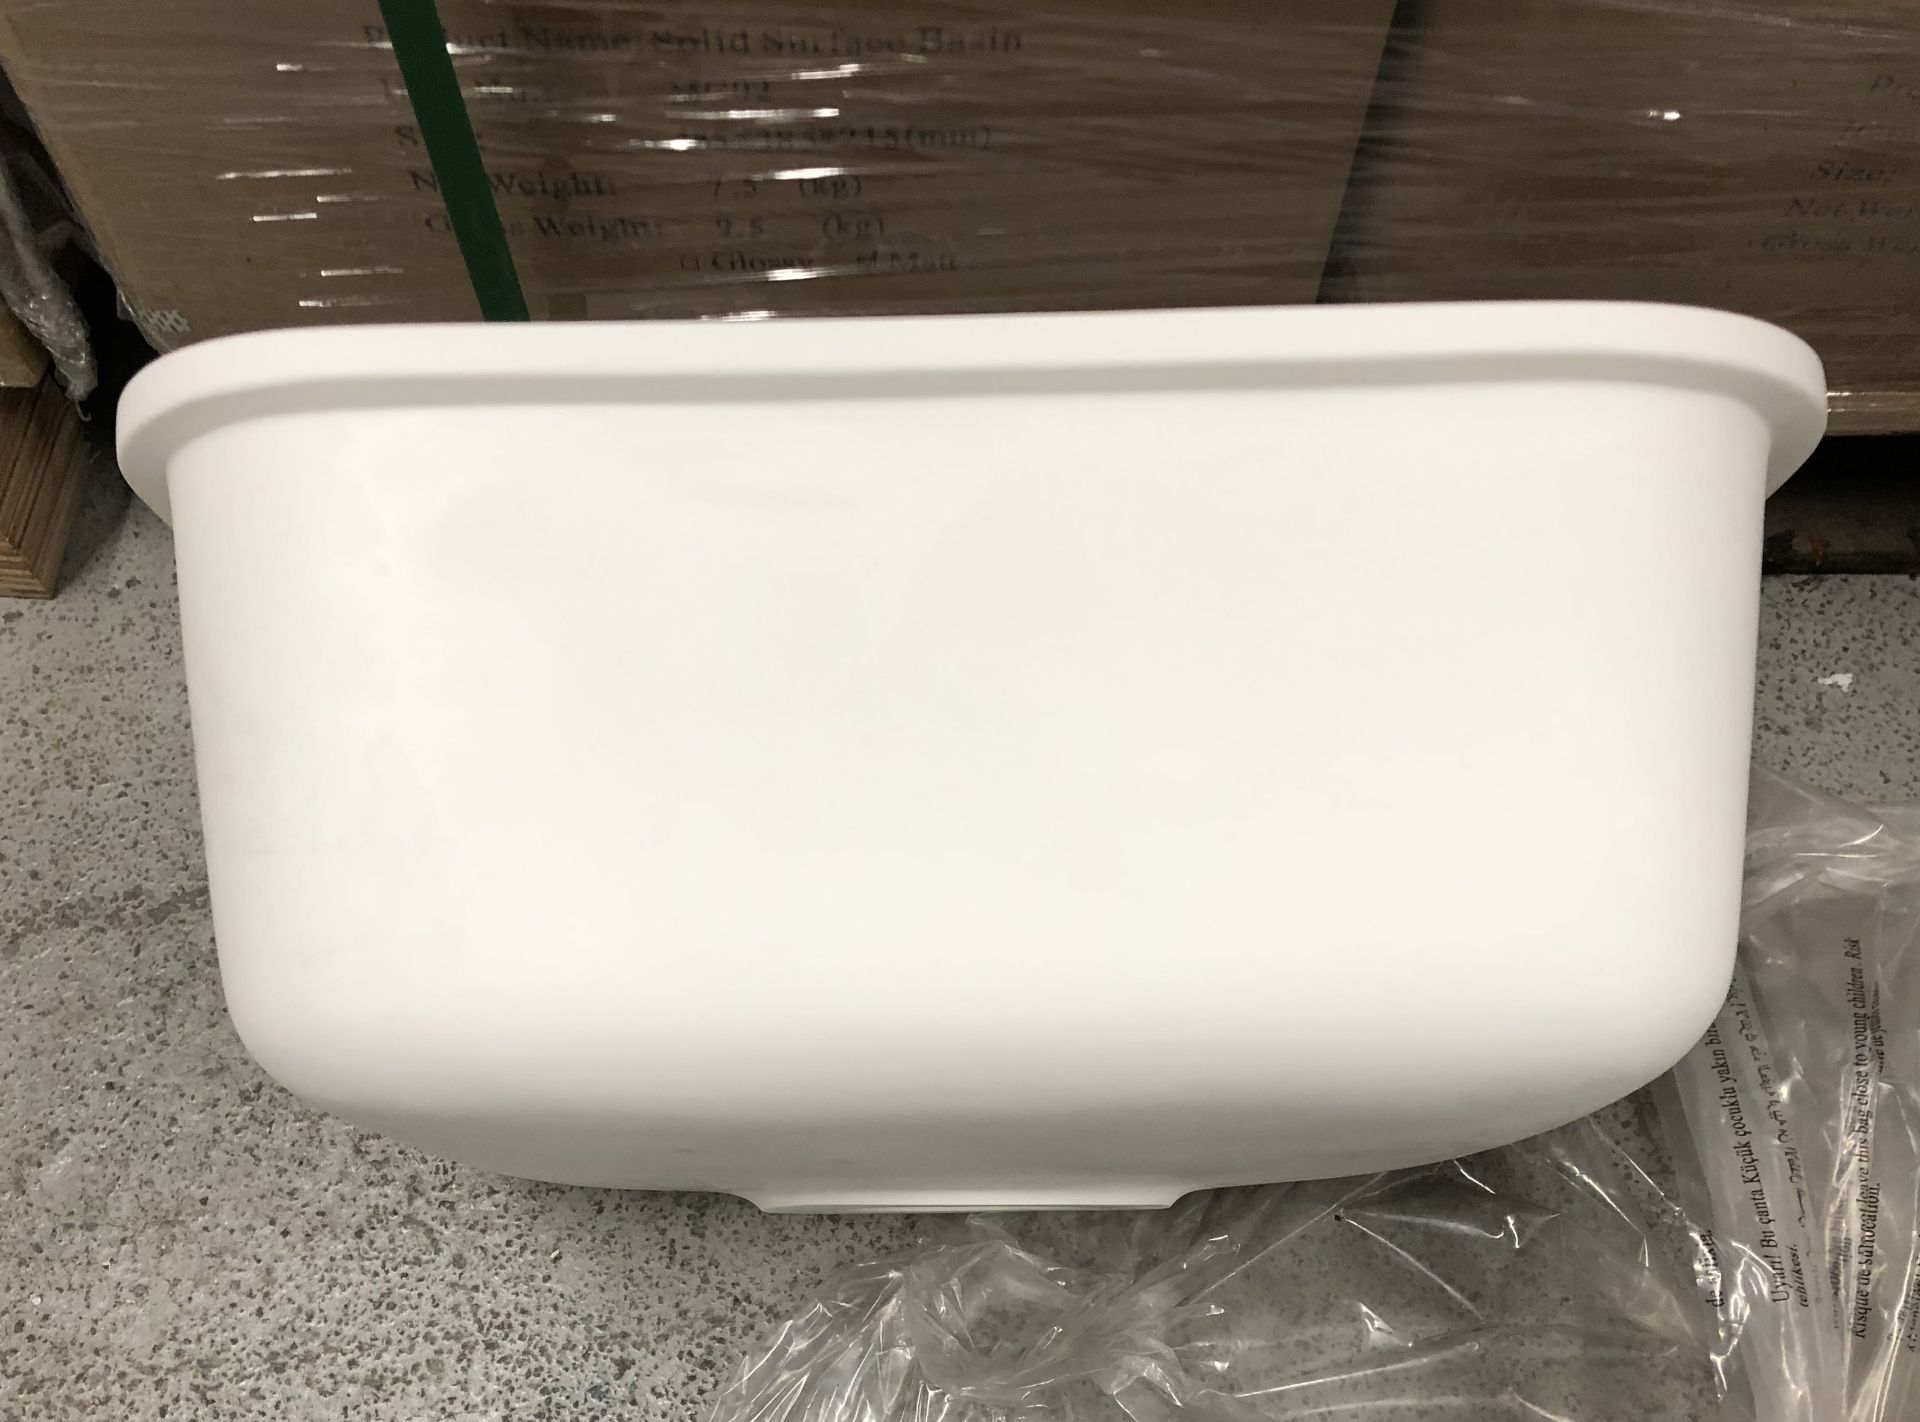 SOLID SURFACE WASH BASIN 485 X 385 X215 (MM) WEIGHT 7. - Image 2 of 3